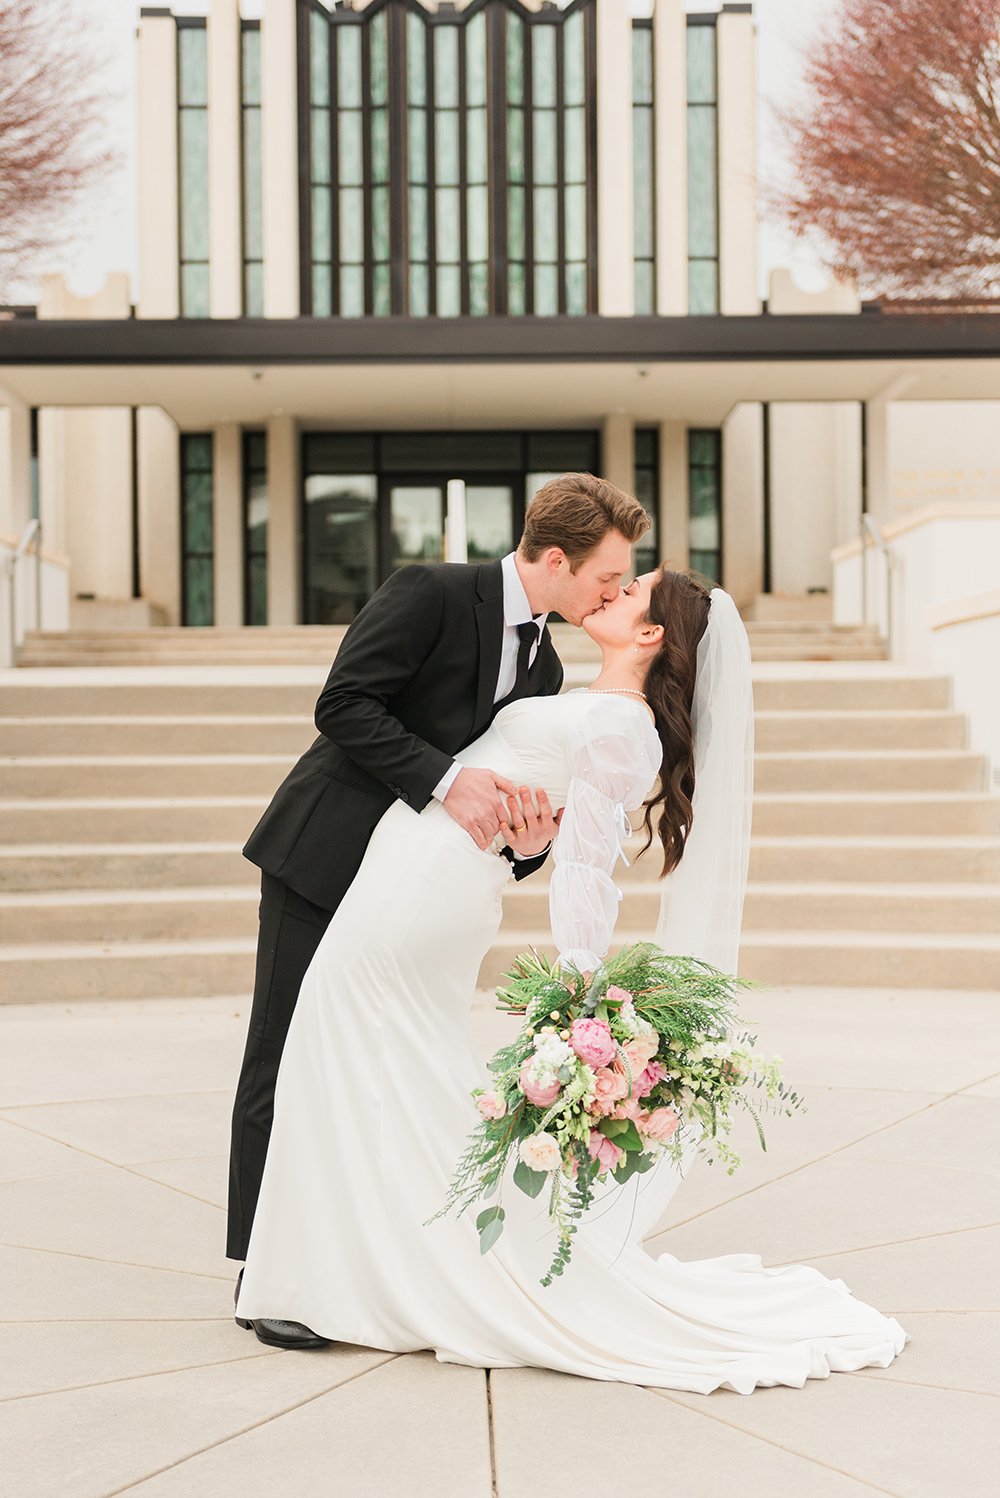  A husband dips and kisses his new bride in front of the Atlanta, Georgia LDS temple. Professional wedding photographer temple wedding pictures#peachtreecity #weddingphotographer #ldsweddings #atlantatemple #jacquieerickson #weddingkiss 